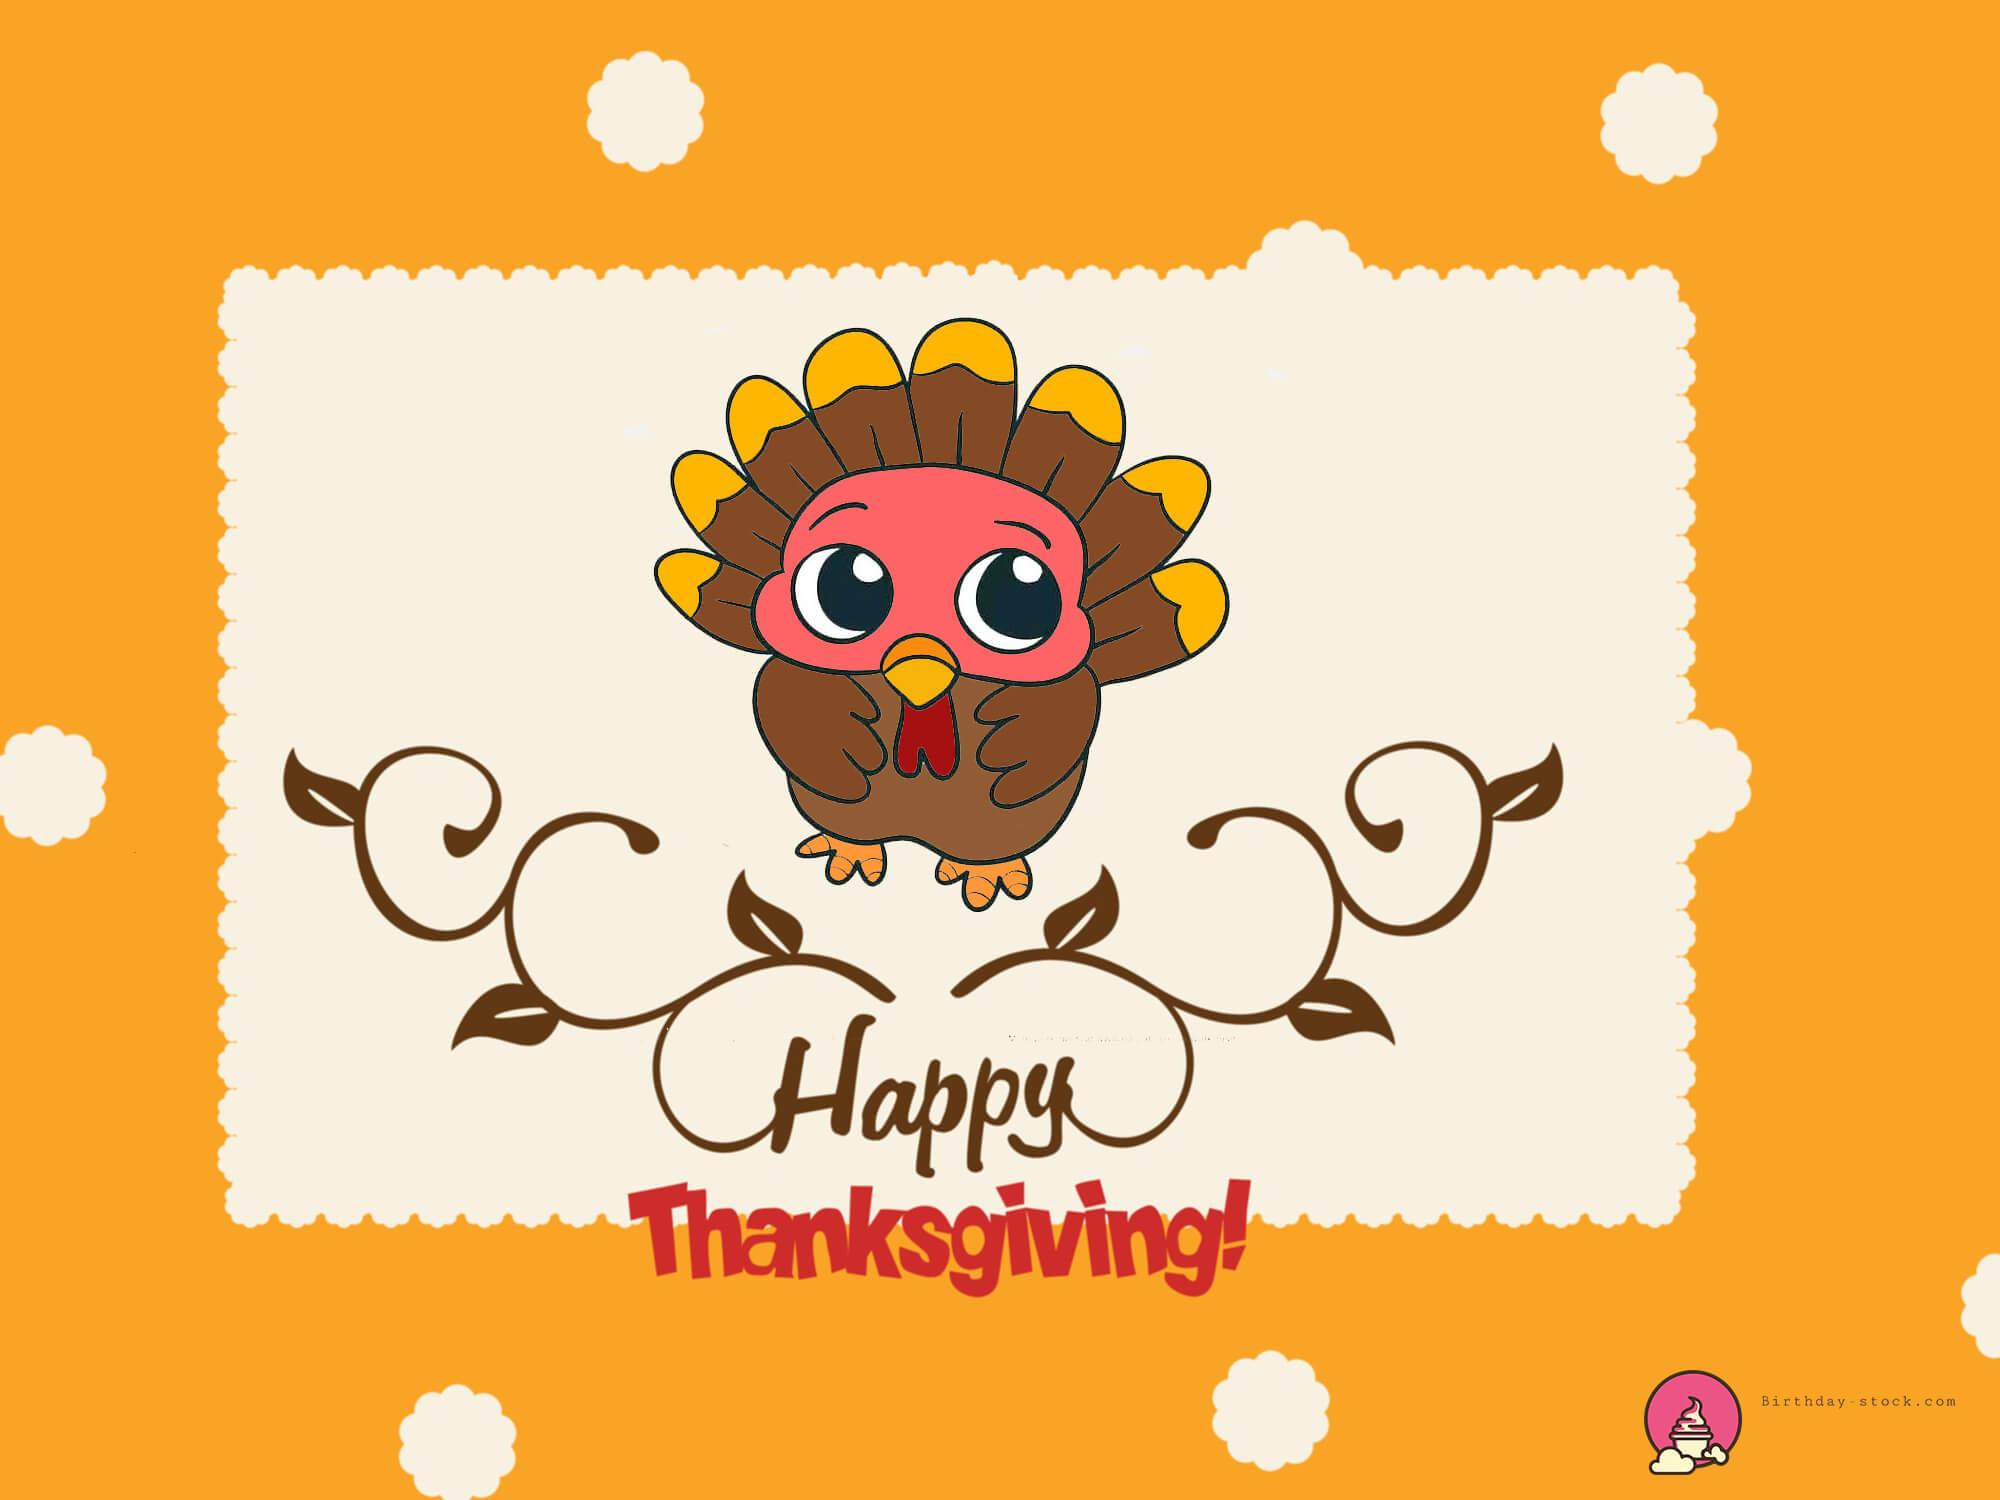 Happy Thanksgiving Image Picture, Wallpaper HD Free 2019